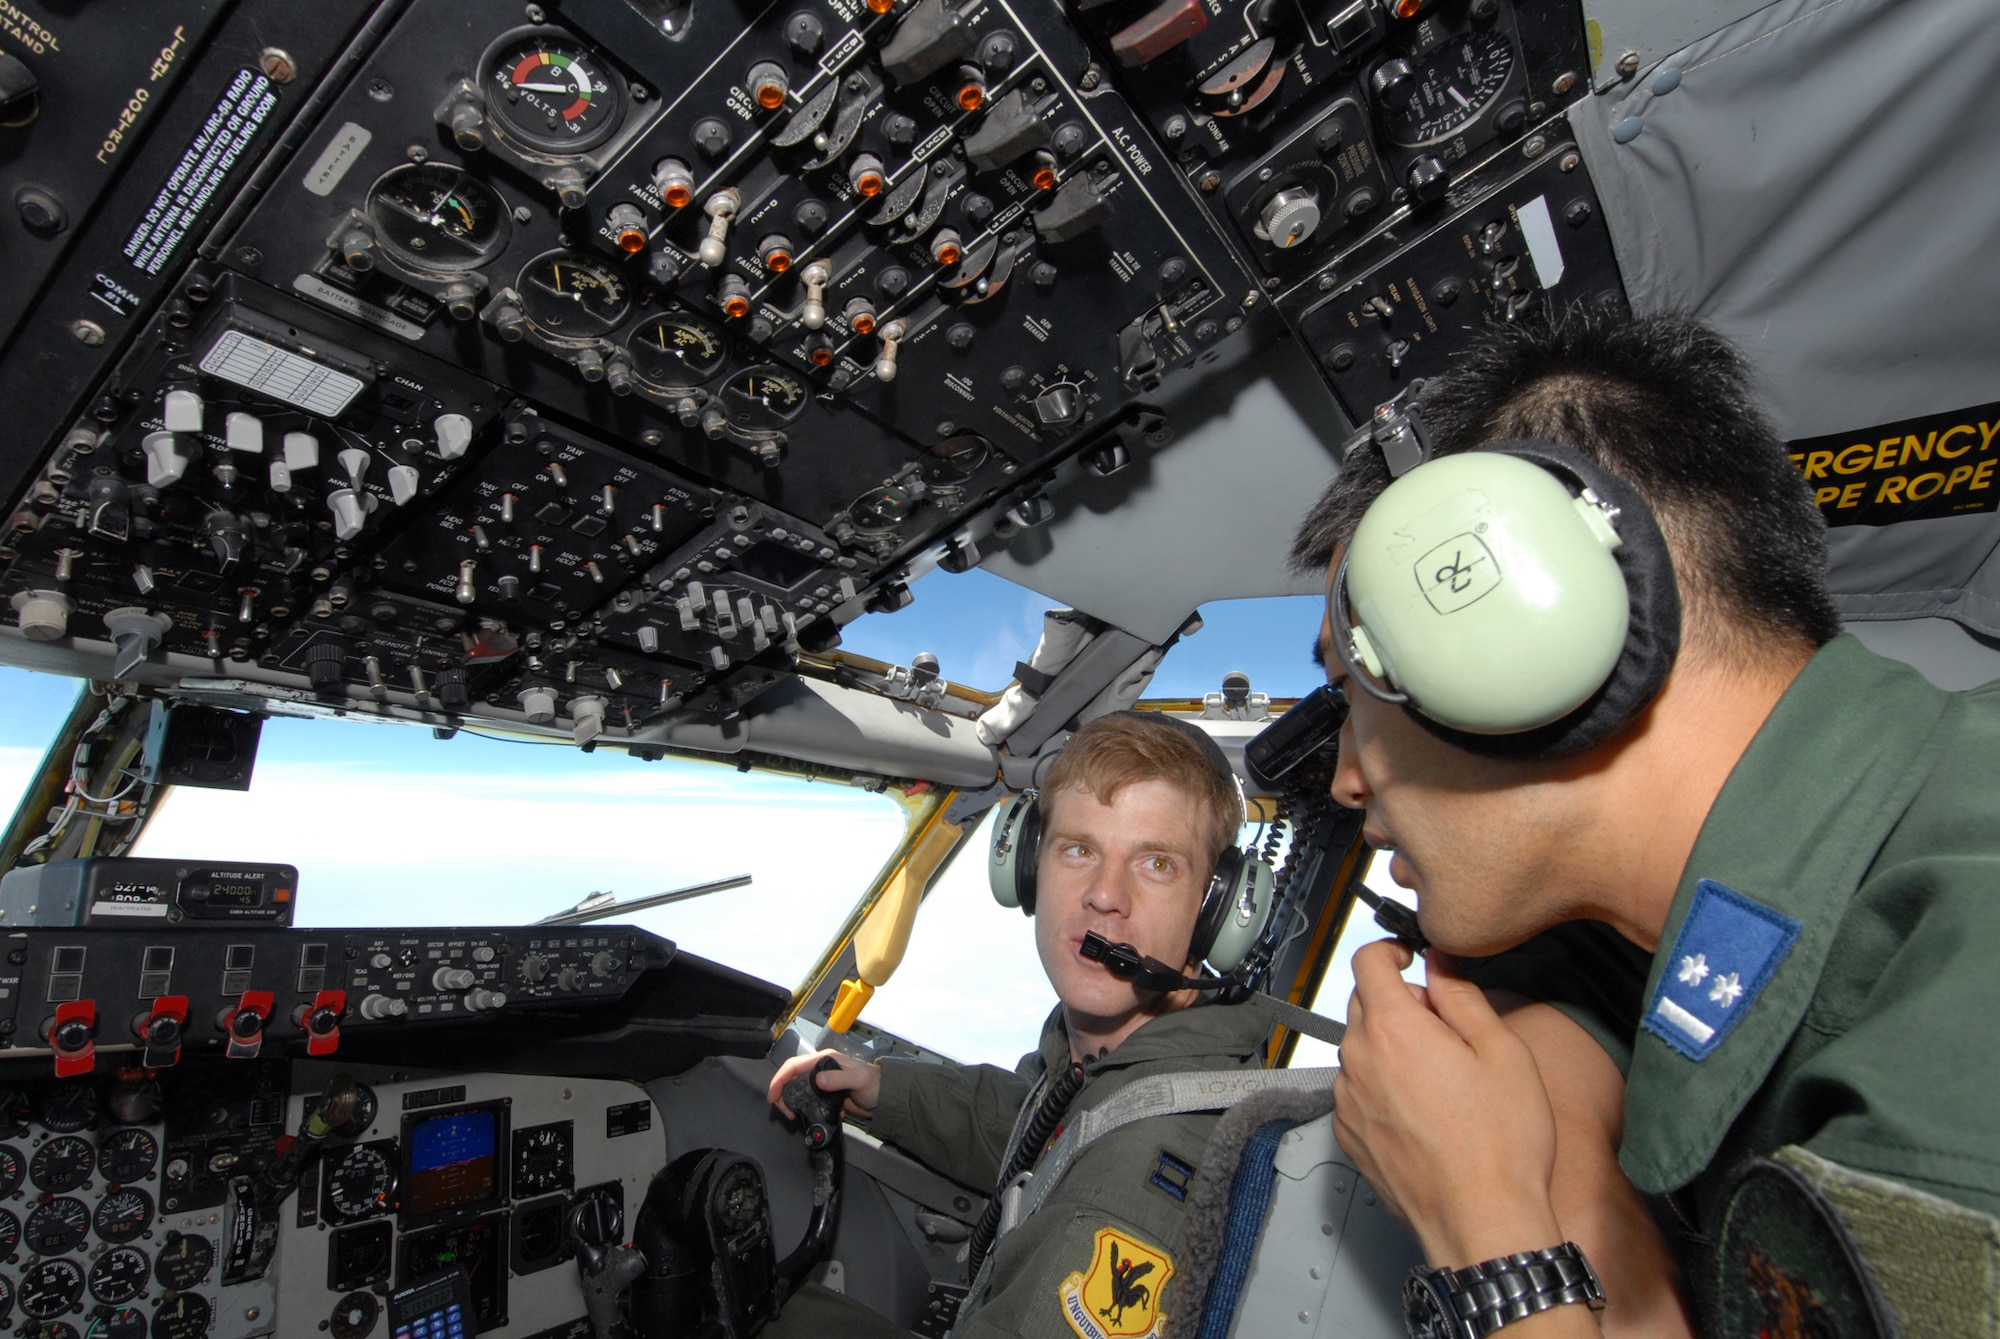 Capt. Scott Karl, 909th Air Refueling Squadron, explains to Daisaku Mieda, Japan Air Self Defense Force, the procedures for piloting the refueling jet during training at Kadena Air Base, Japan. The training was conducted to familiarize JASDF members with U.S. Air Force refueling procedures. (U.S.photo/Staff Sergeant Darnell T. Cannady)